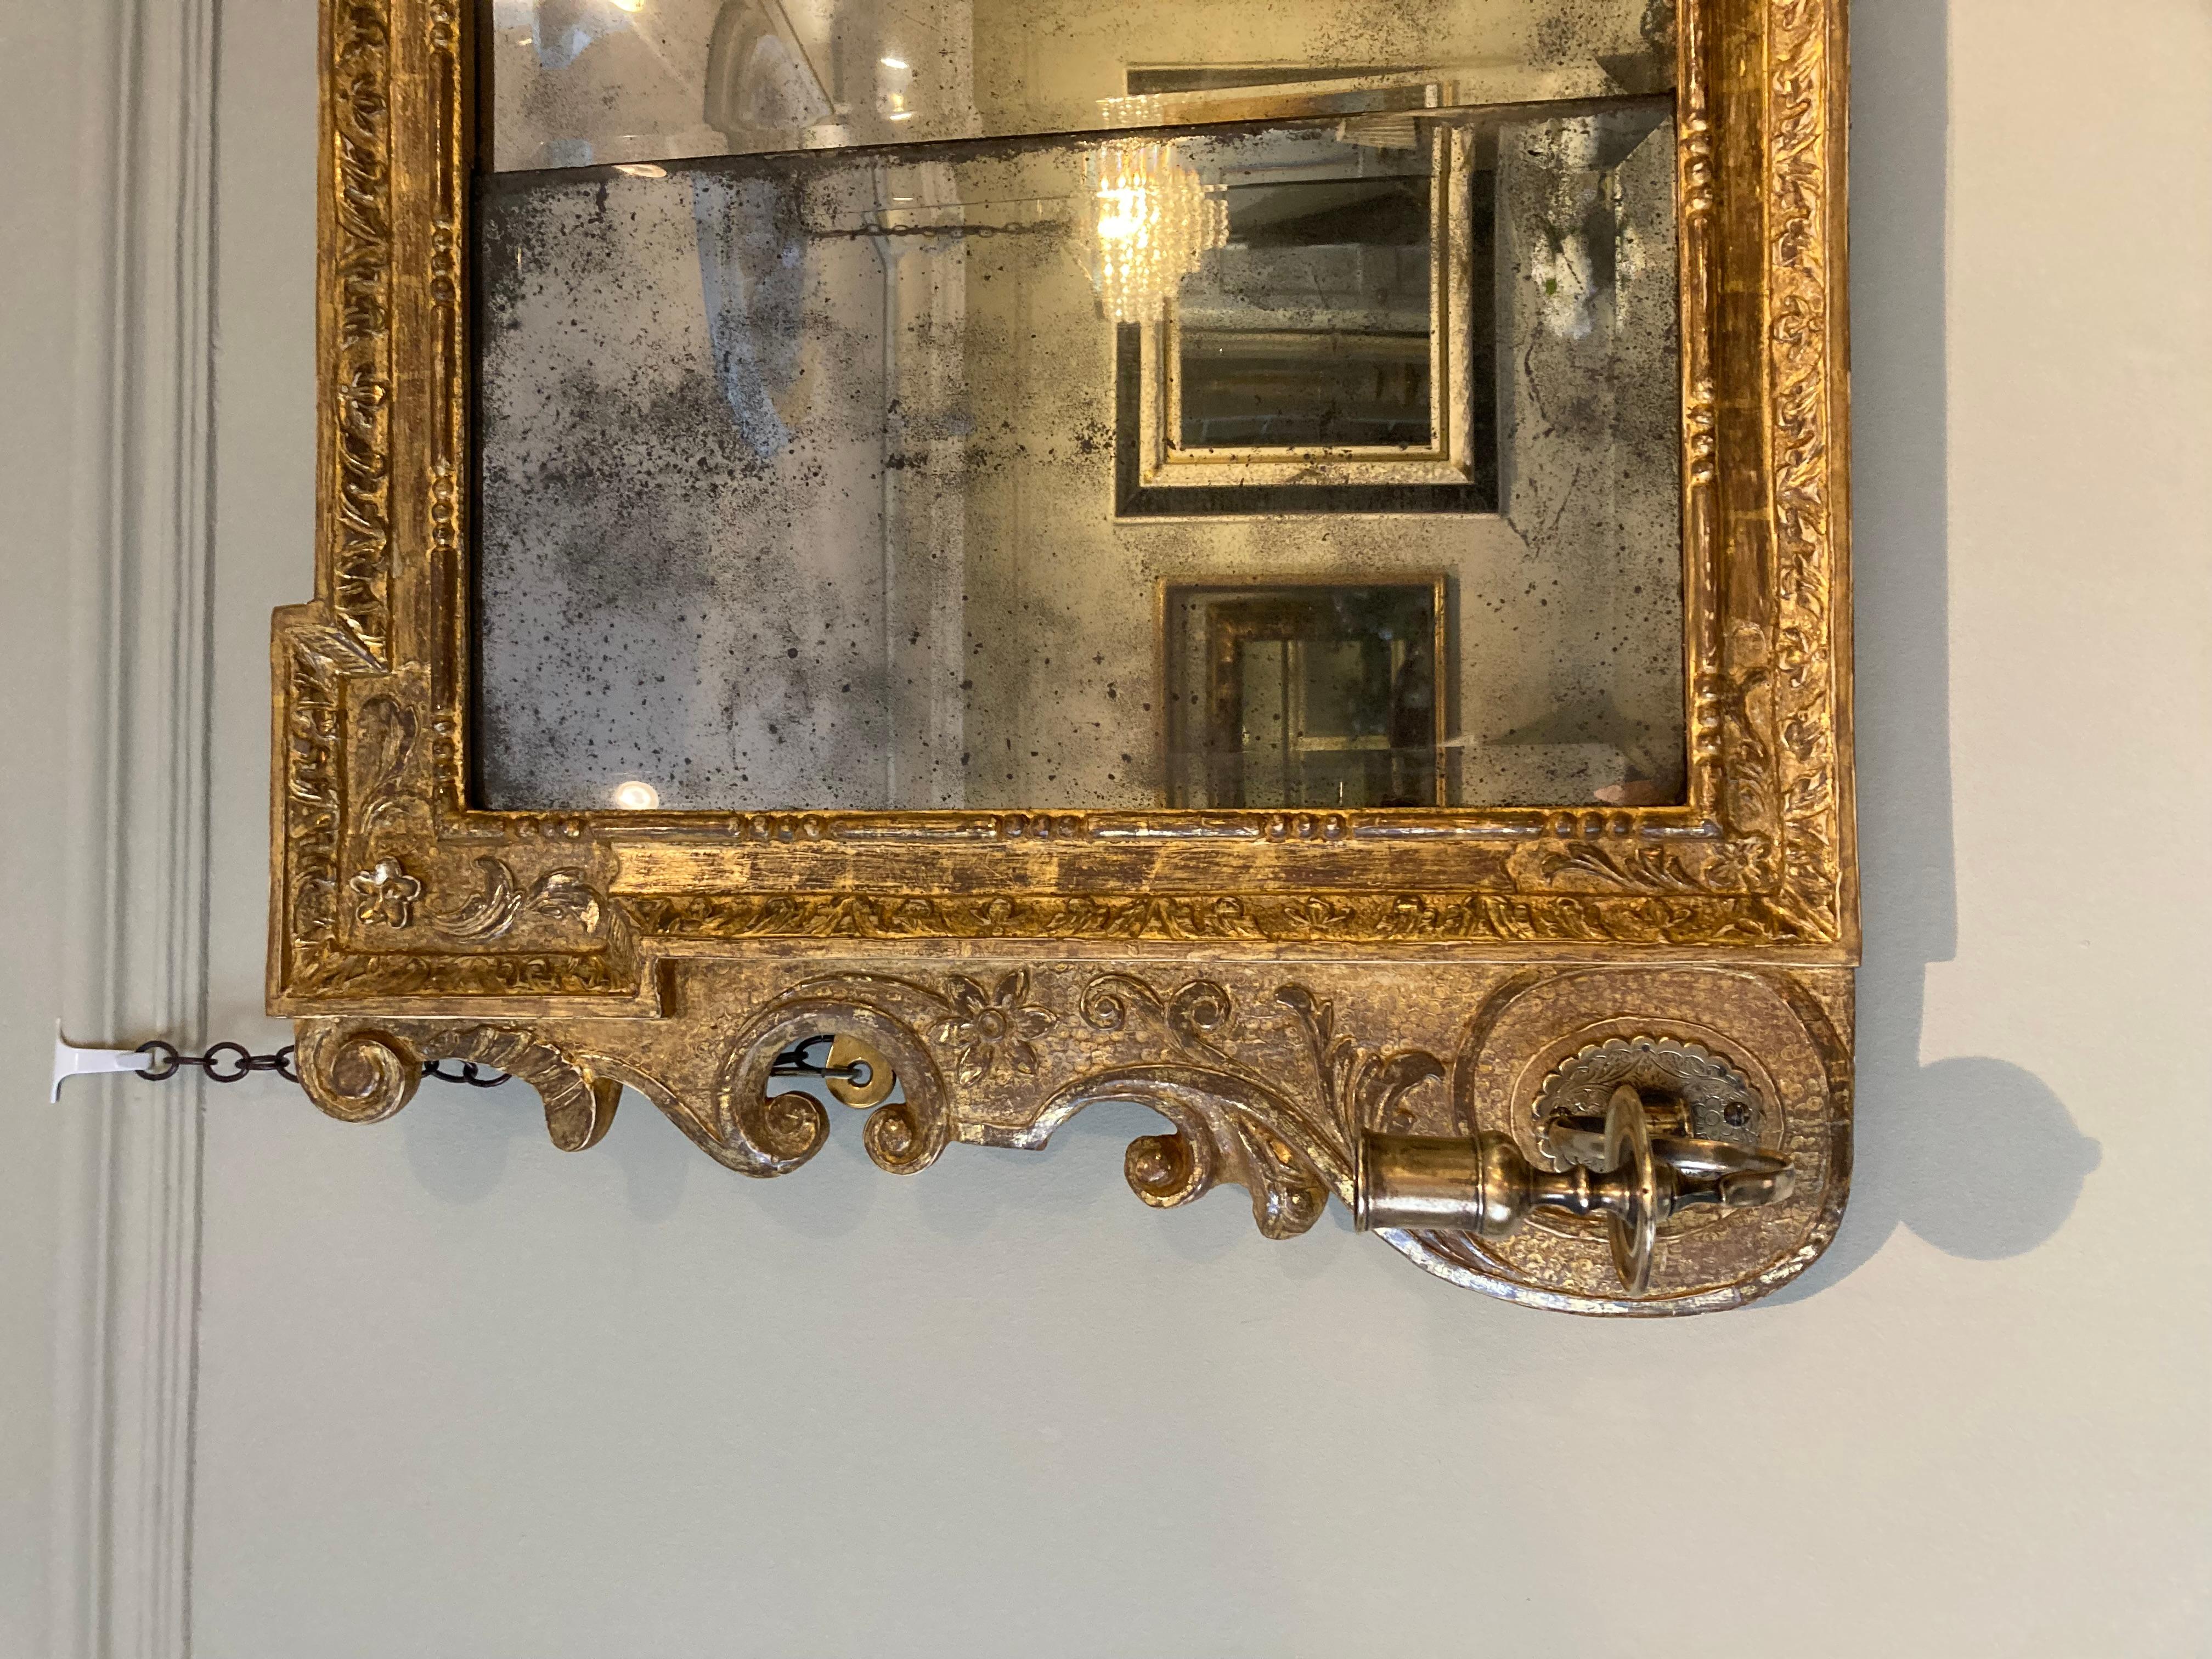 A fine early 18th Century triple-plate George II carved giltwood framed overmantle mirror of horizontal form with acanthus leaf, floral and foliate borders and scrolled sides housing two girandole candle arms. The mirror retains its original